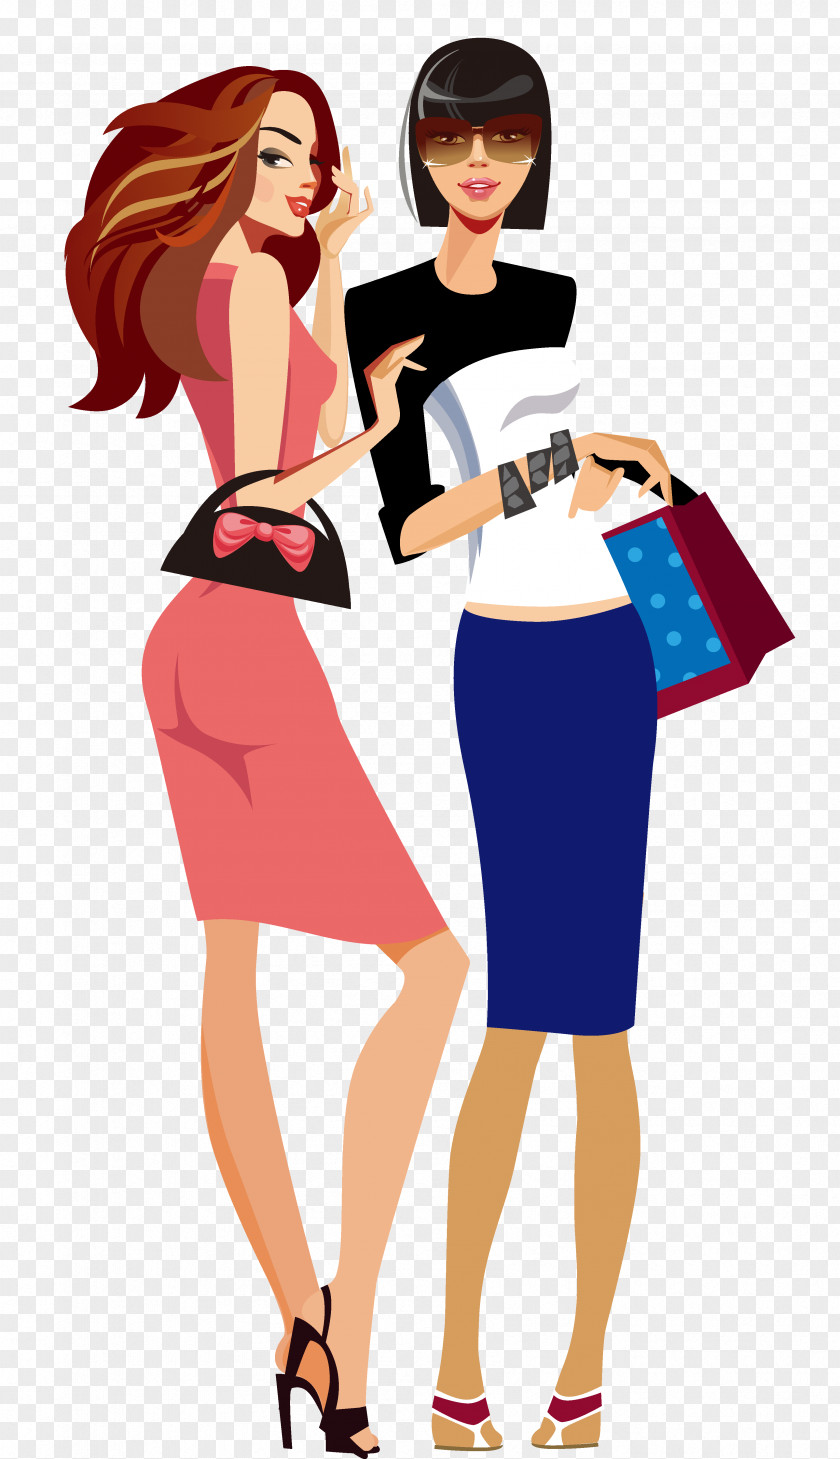 Fashion Shopping Girl PNG Girl, Creative Business People, two women illustration clipart PNG